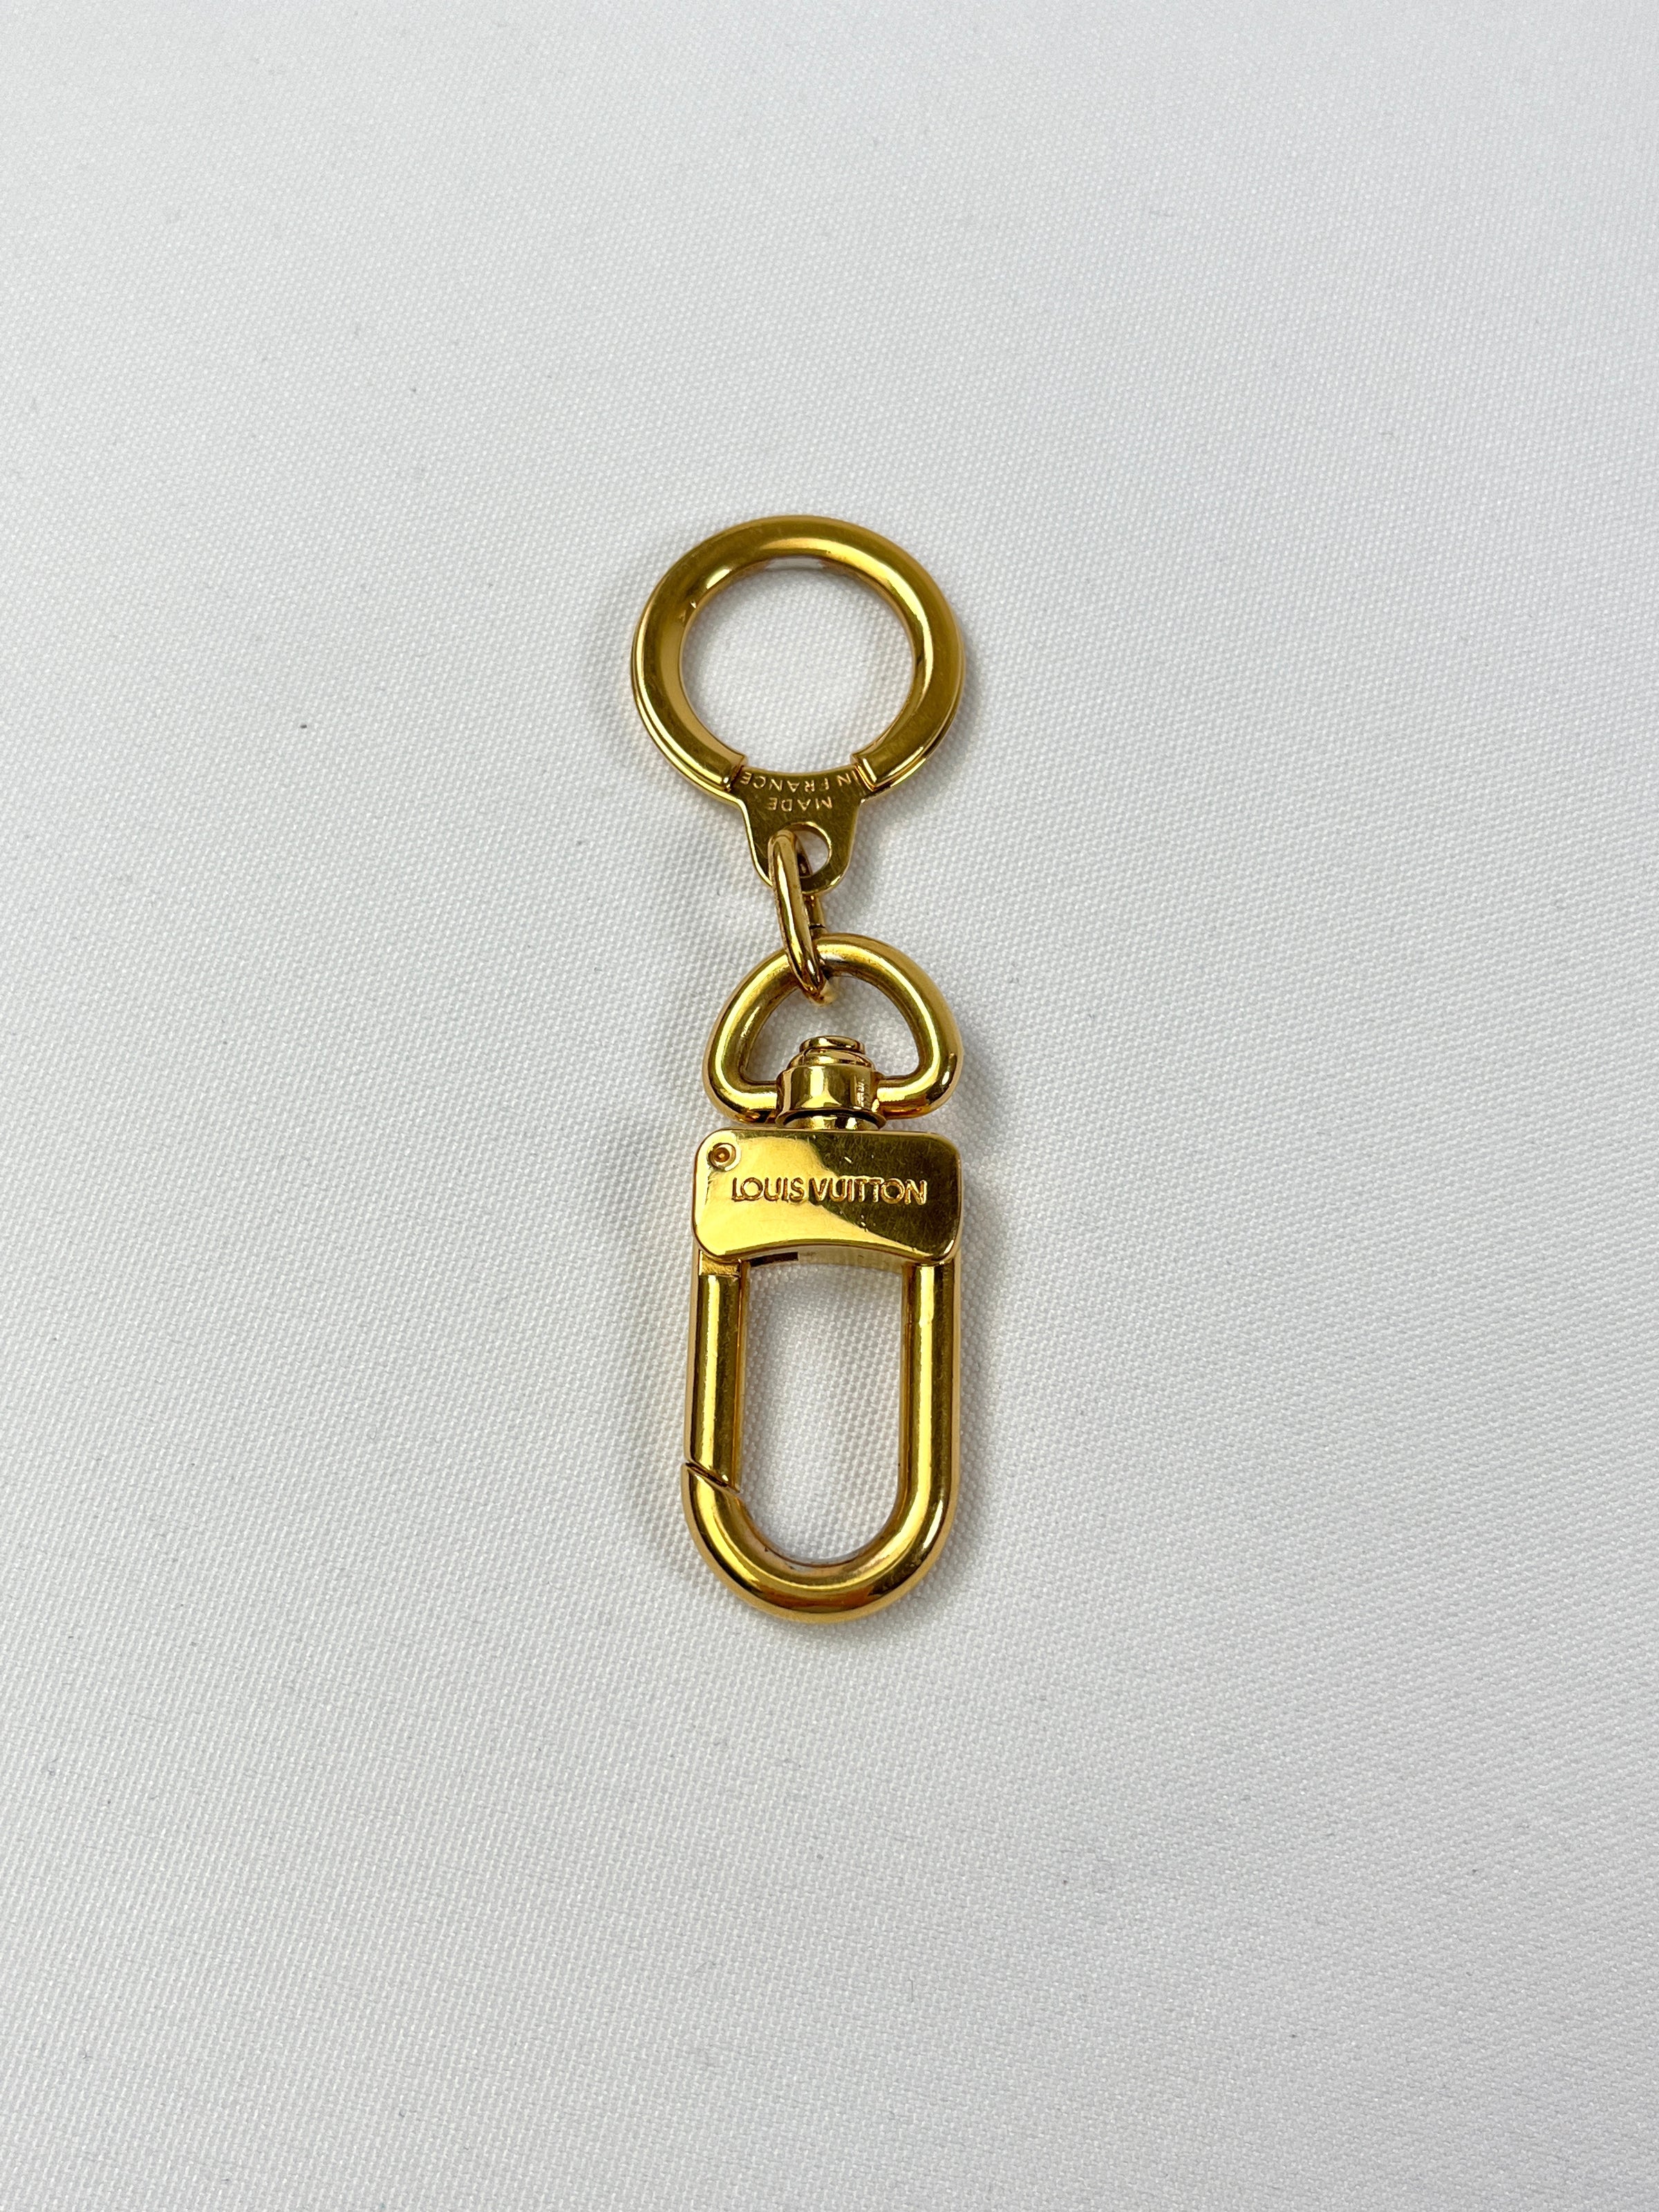 Louis Vuitton Bolt Extender And Key Ring - Gold Keychains, Accessories -  LOU774847